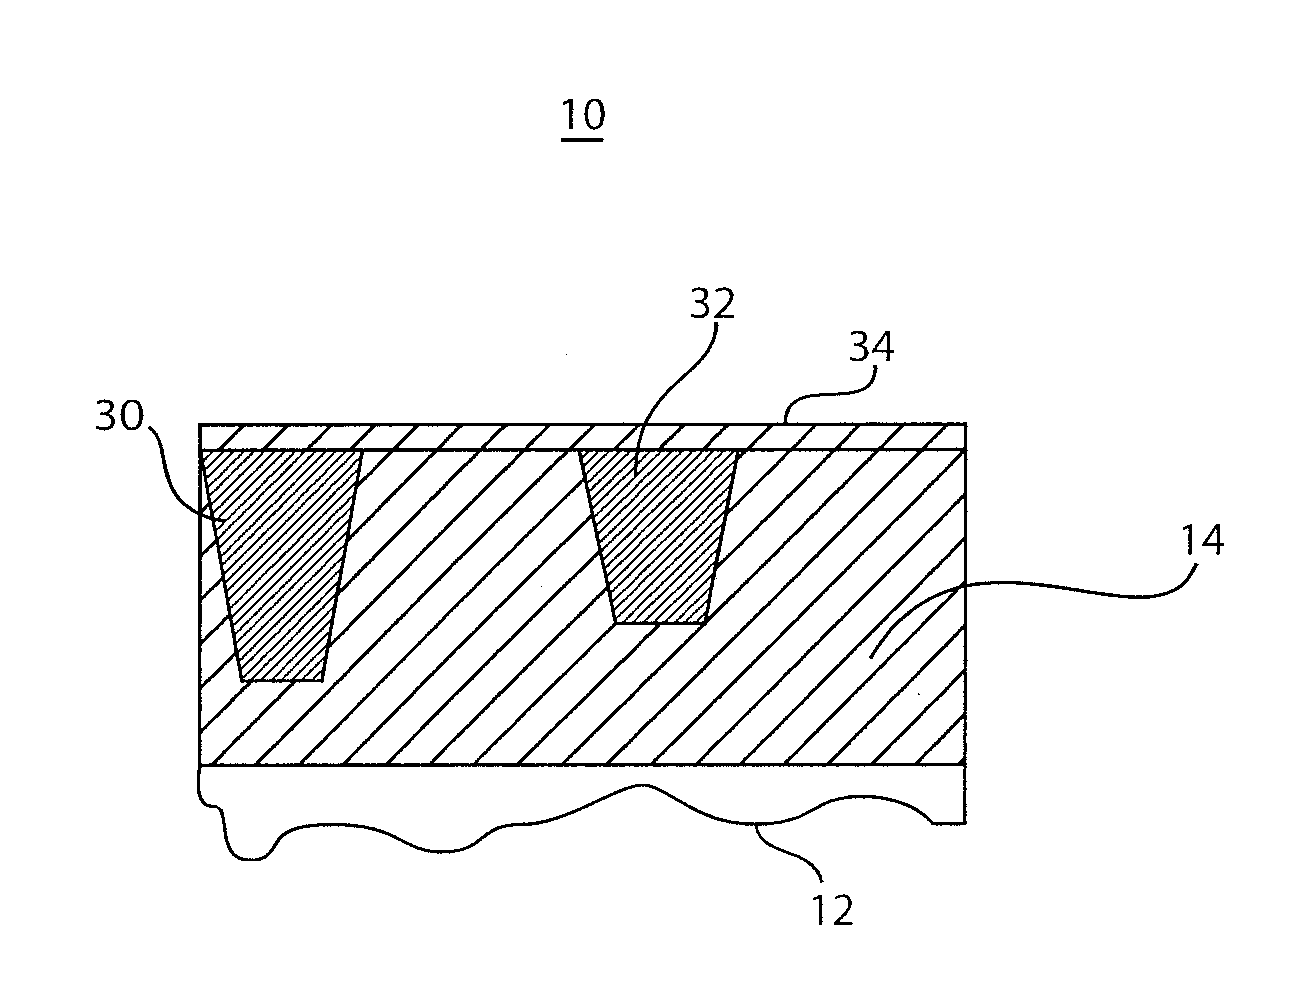 Crenulated wiring structure and method for integrated circuit interconnects